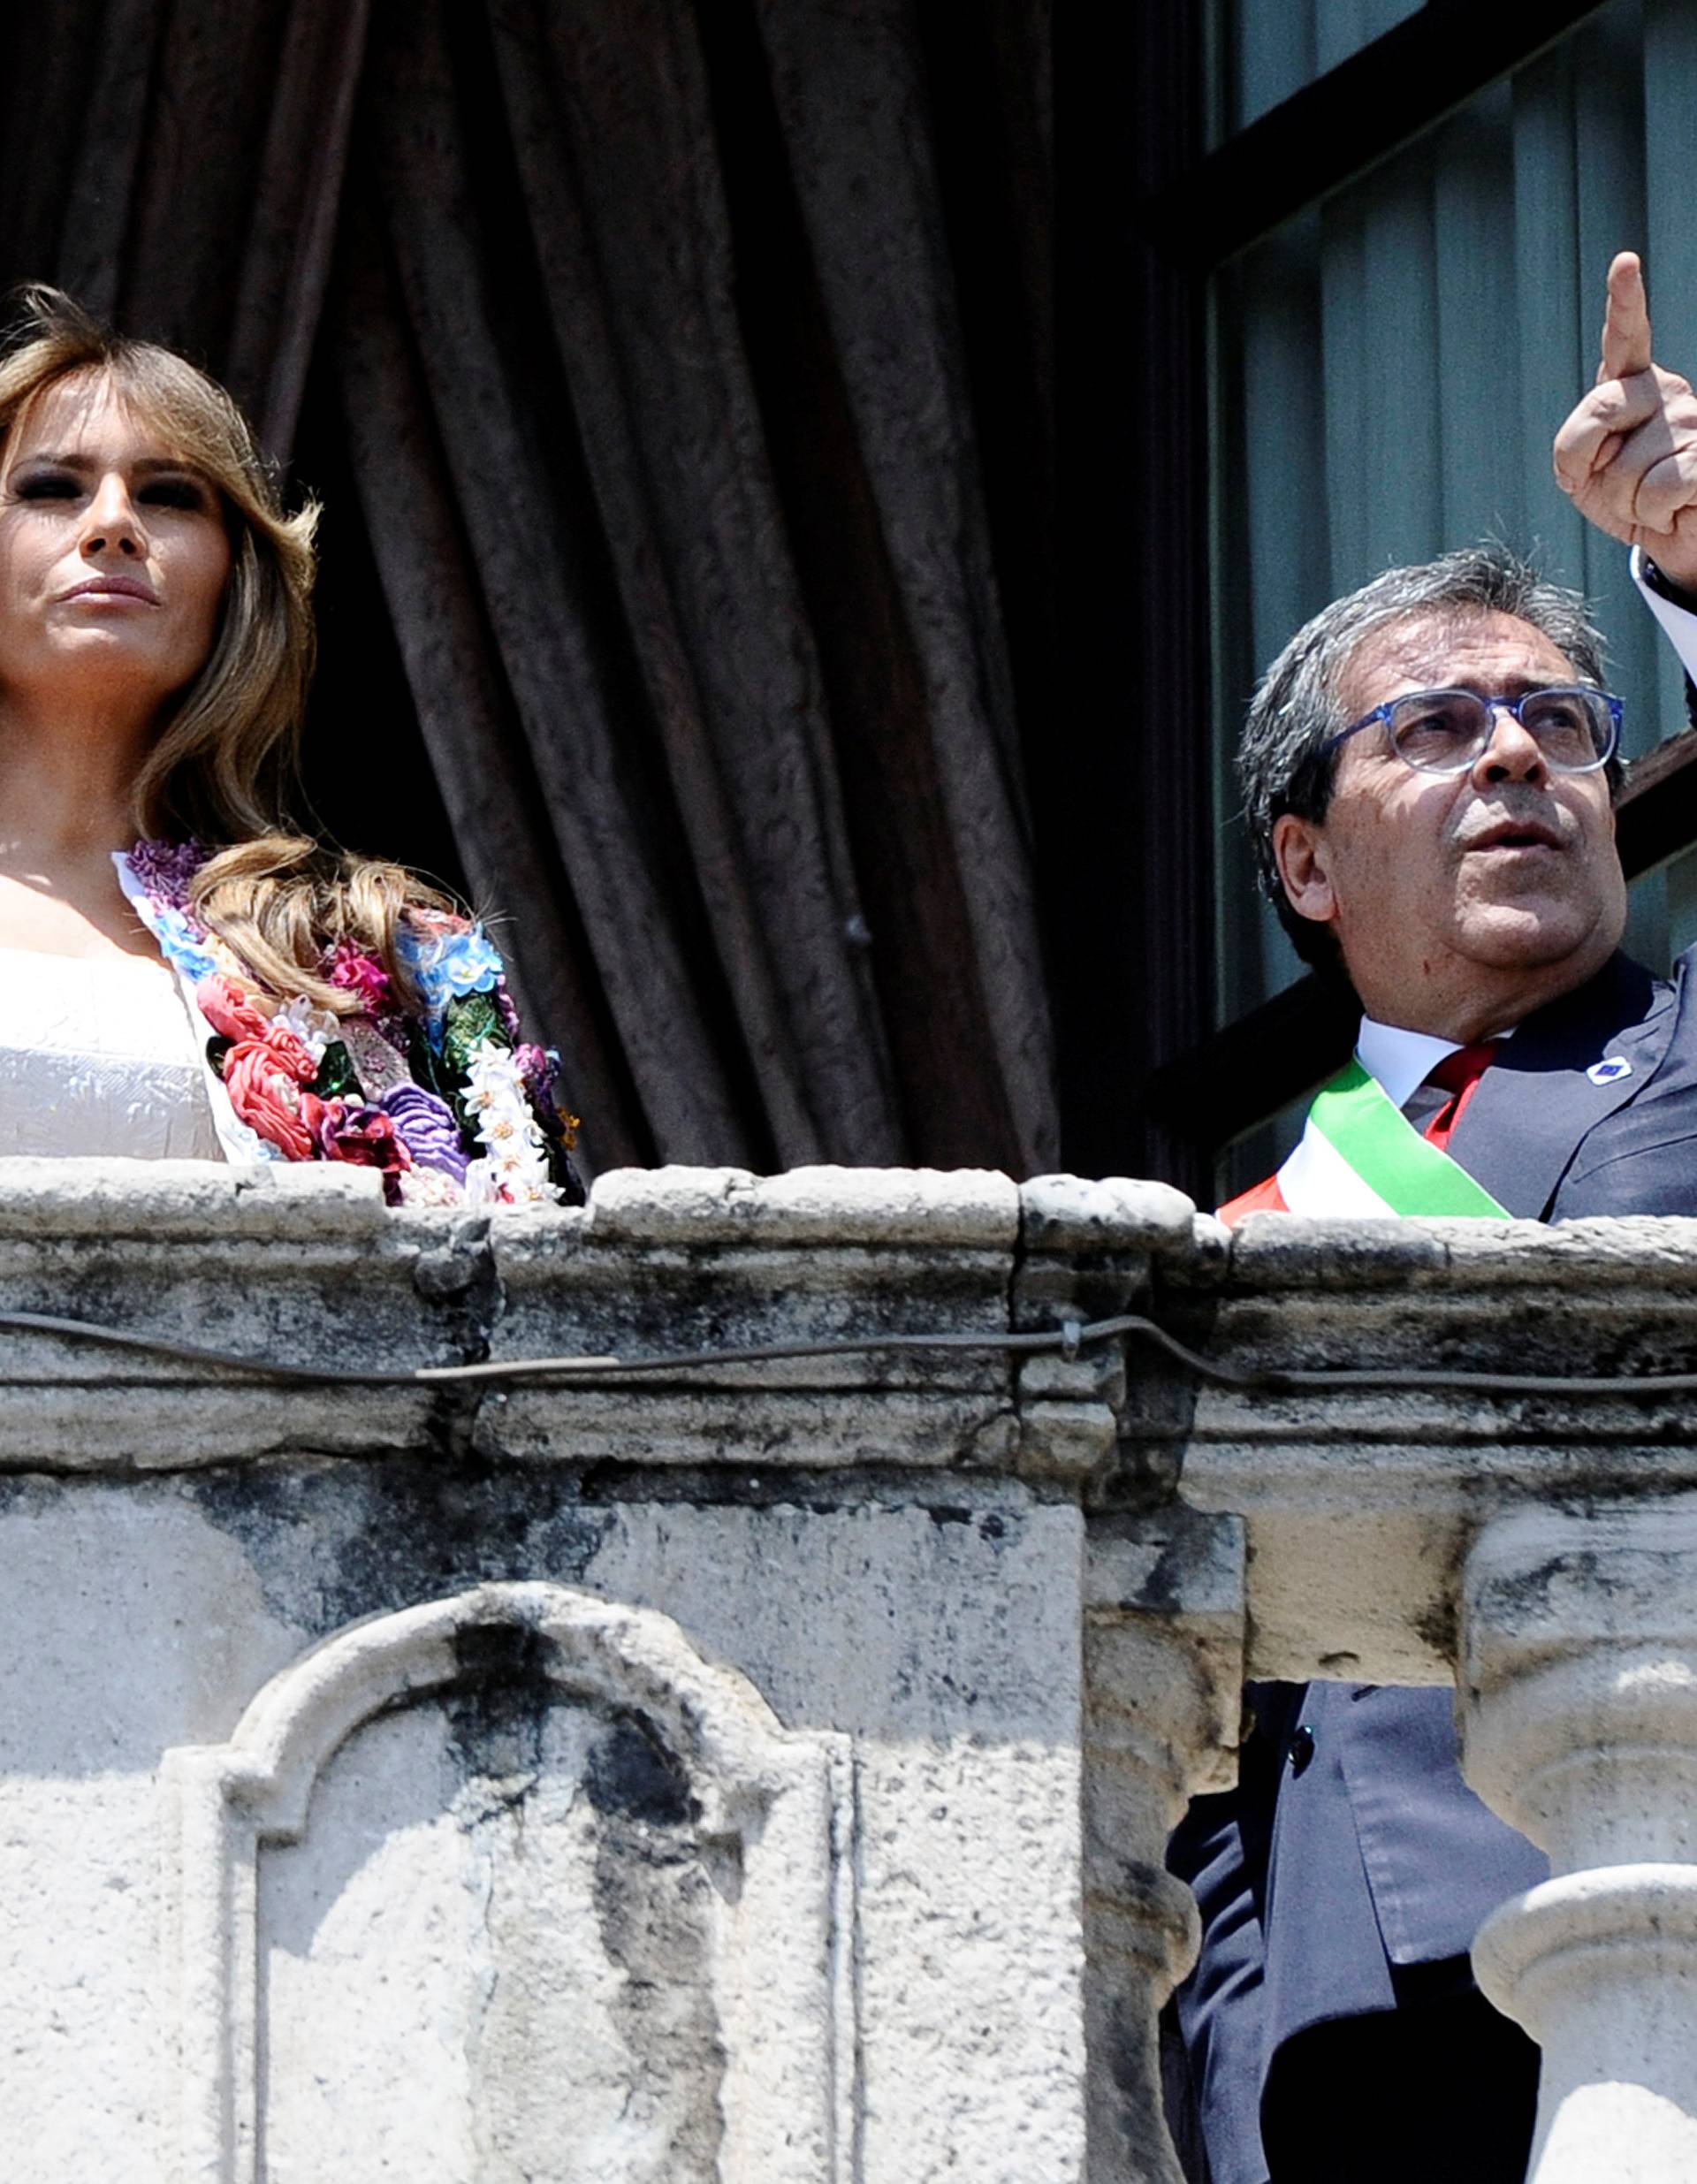 Mayor of Catania Enzo Bianco gestures next to U.S. first lady Melania Trump from the balcony of the Town Hall in Catania